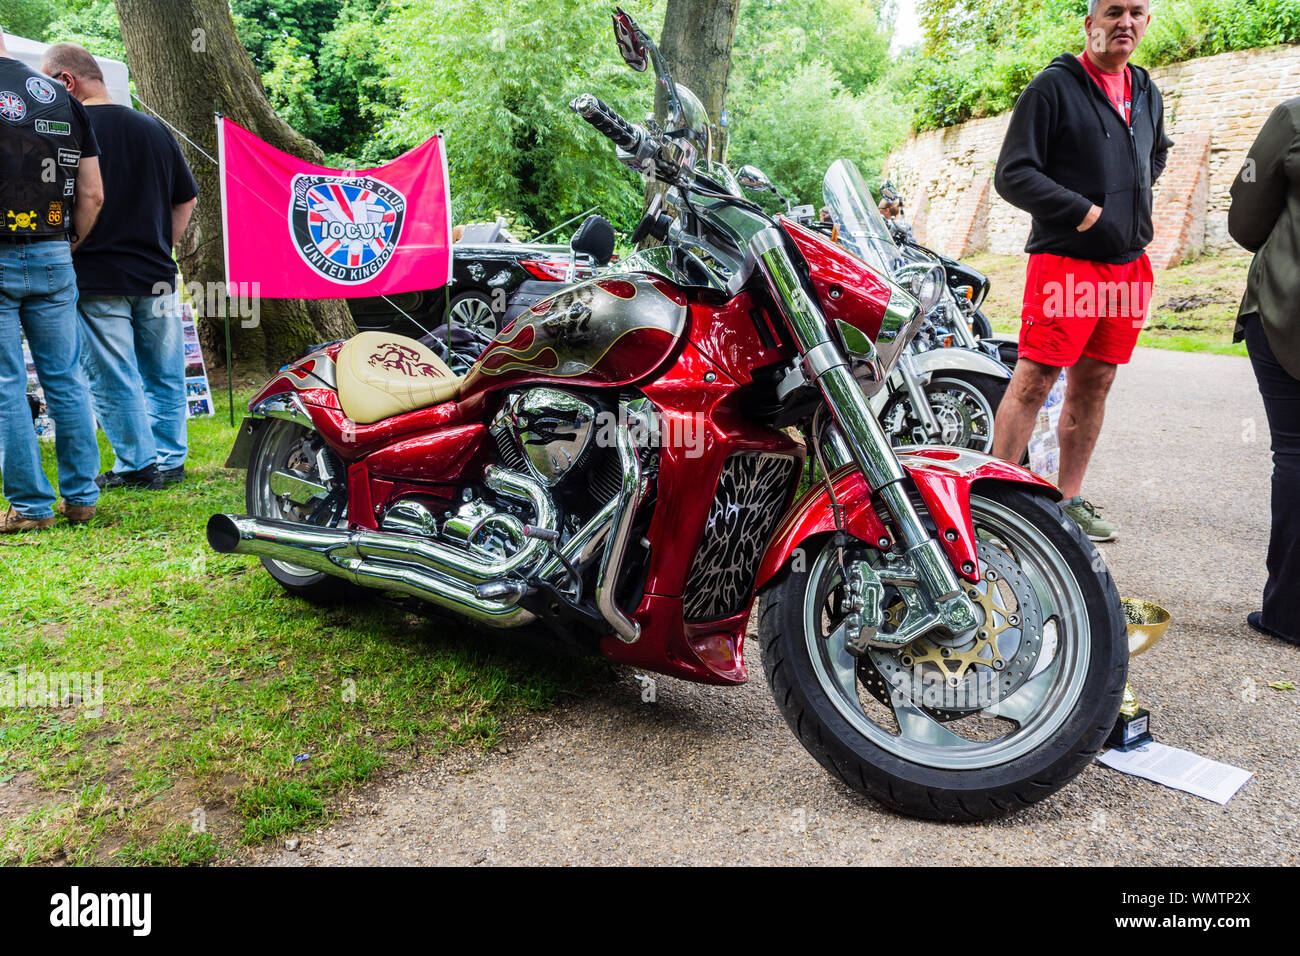 A customized red Suzuki Intruder motorcycle in front of a banner promoting  Intruder Owners Club at the 2019 Calne Bike meet Stock Photo - Alamy